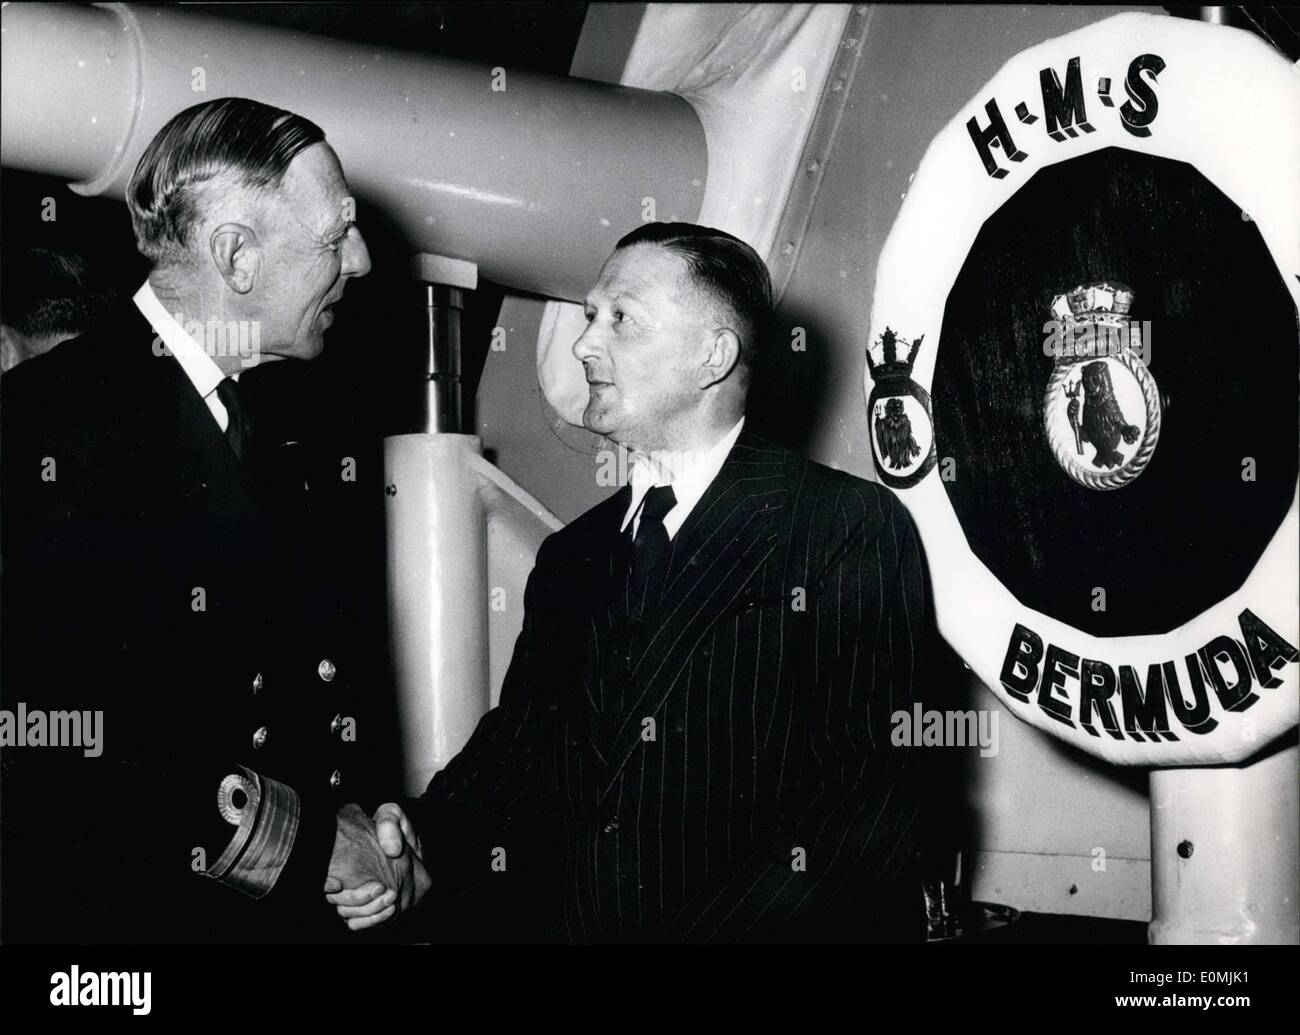 Jun. 06, 1955 - Gesture of Cooperating during the Kieler Woche The former German Oberstleutnant Gustav Zuschneid was welcomed by Rear-Admiral Richard G. Onslow on board of HMS Bermuda anchored at Kiel during the Kieler Woche. These days Zuschneid sent back to England the Union Jack, which had been hauled in by the Germans as they entered Paris in World War II at a British soldier's cemetery near Versailles. OPS: Admiral Onslow (L) and Herr Zuschneid. Stock Photo